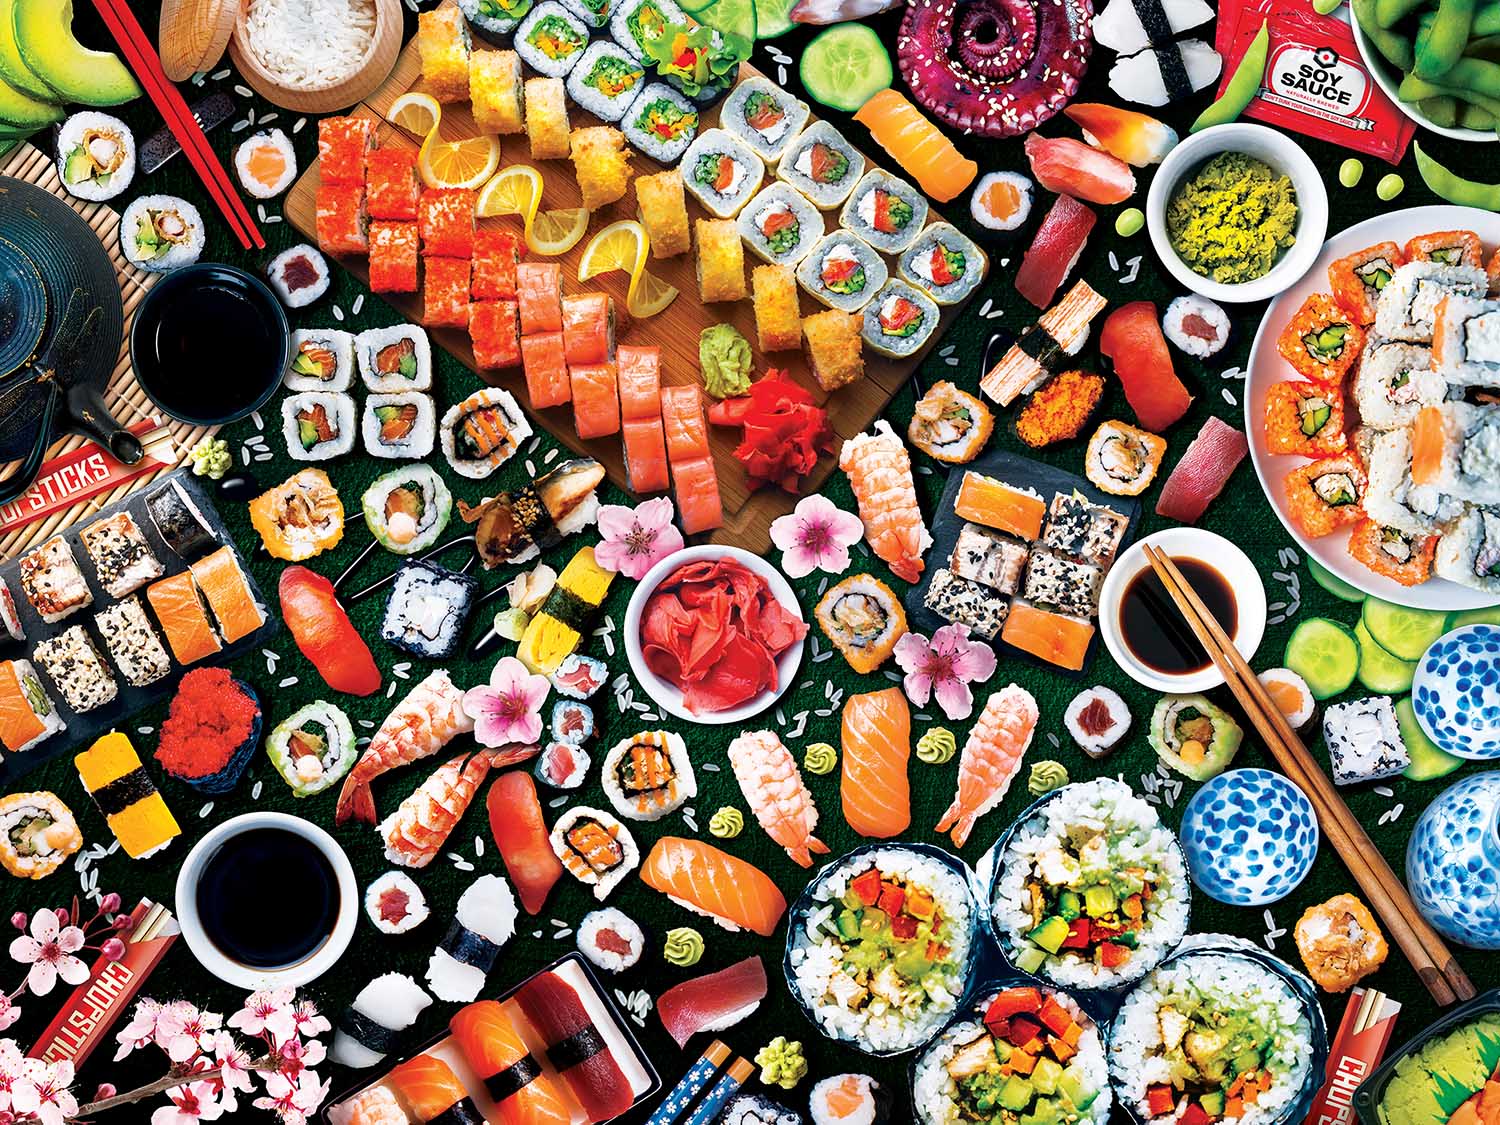 Sushi Surprise Food and Drink Jigsaw Puzzle